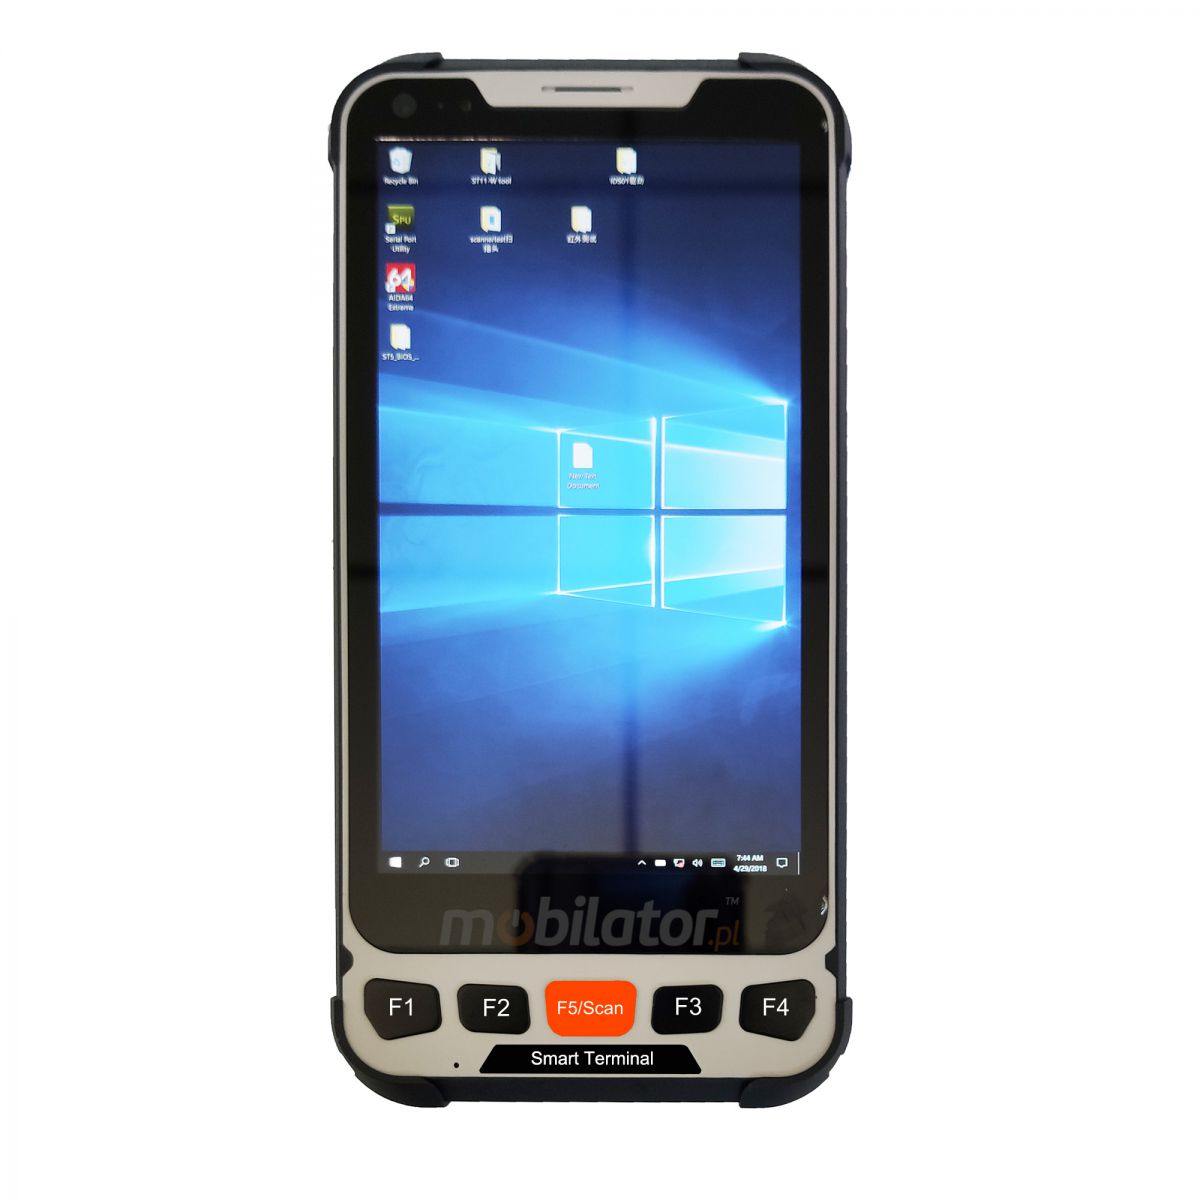 Data collector with 64GB ROM disk and 4GB RAM memory, WINDOWS 10, IP67 and NFC standards - Mobipad SH5 v.1 